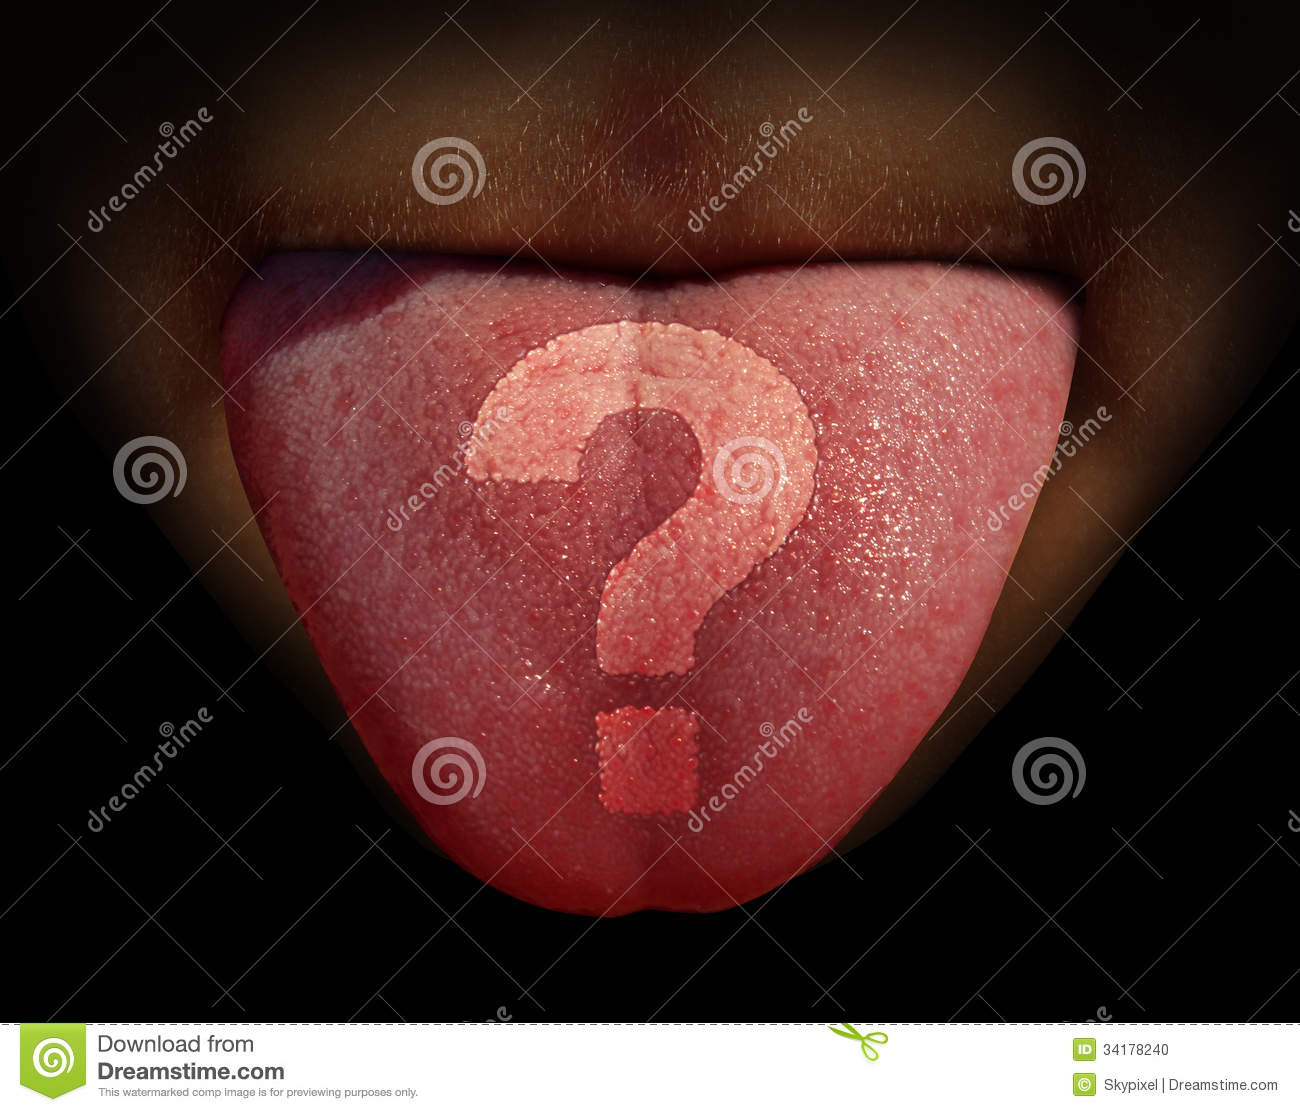 Eating Questions Stock Photo   Image  34178240